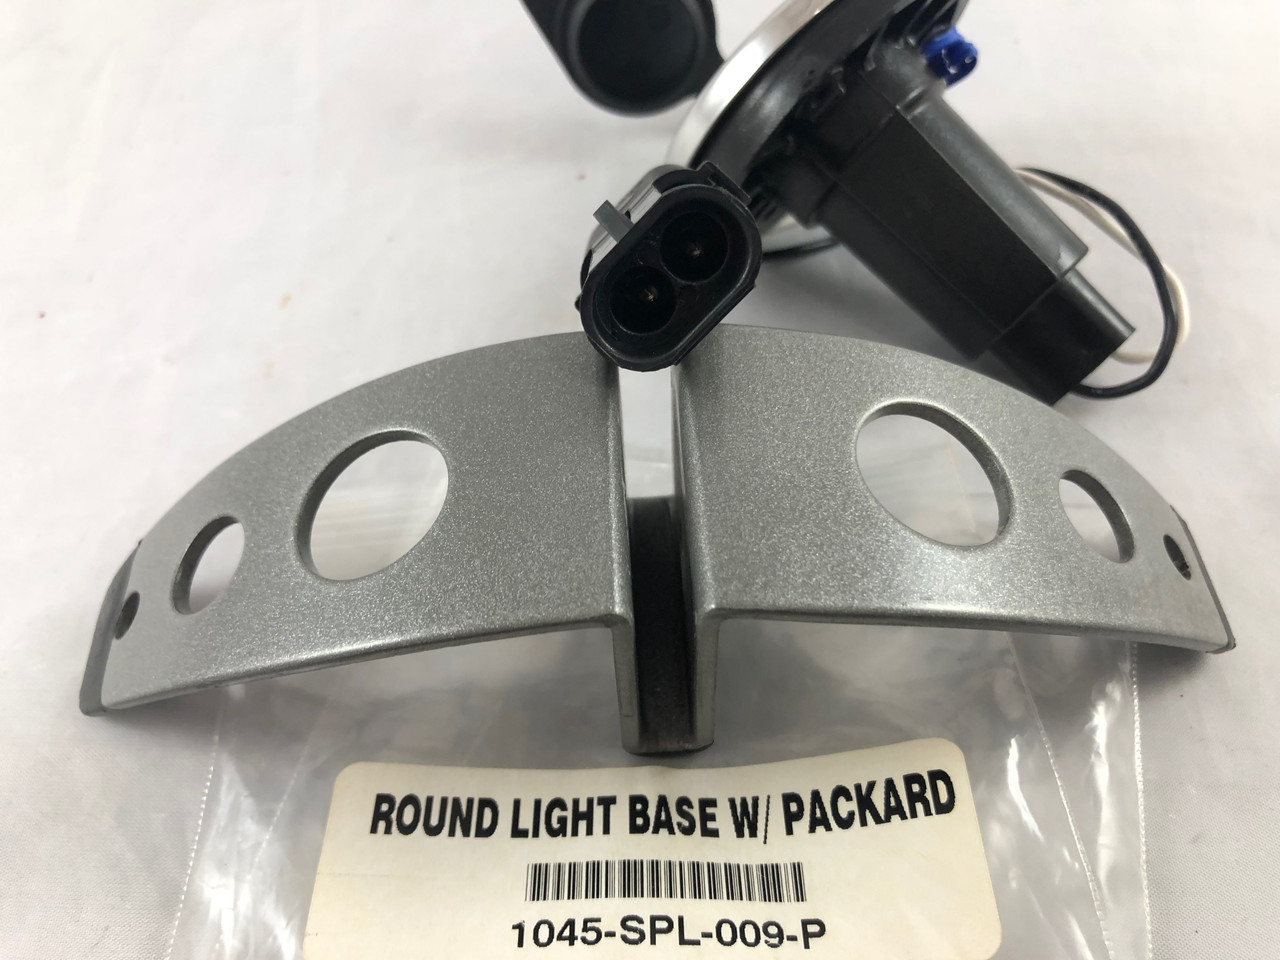 ROUND LIGHT BASE PACKARD  *In Stock & Ready To Ship!